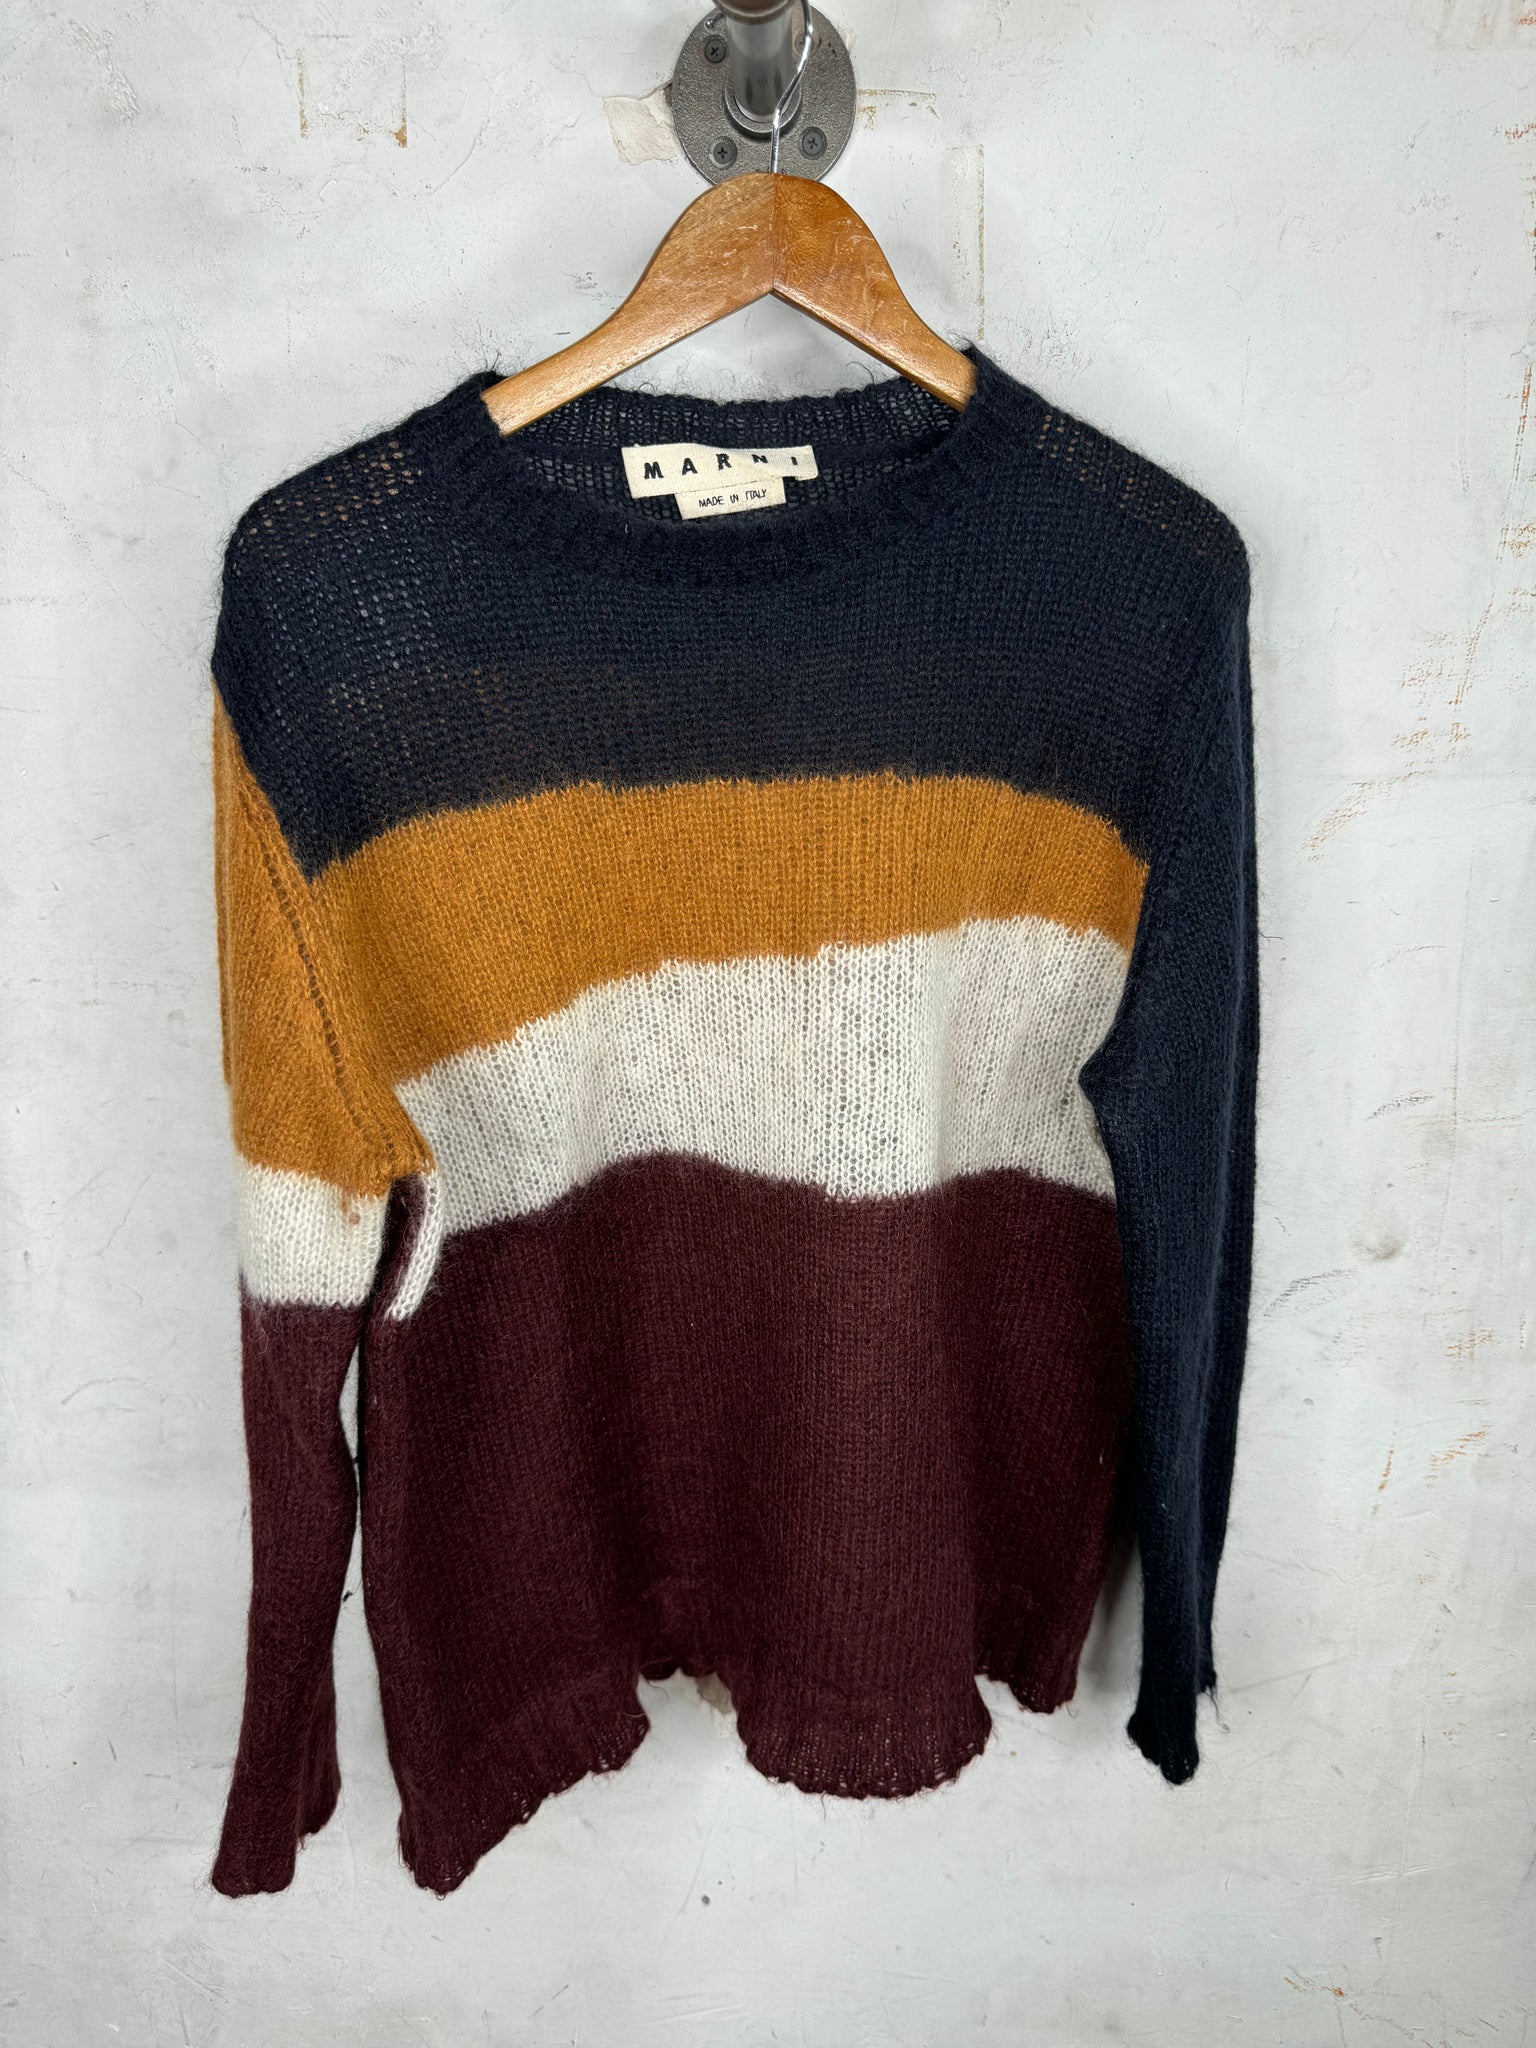 Marni Mohair Color blocked Knitted Sweater